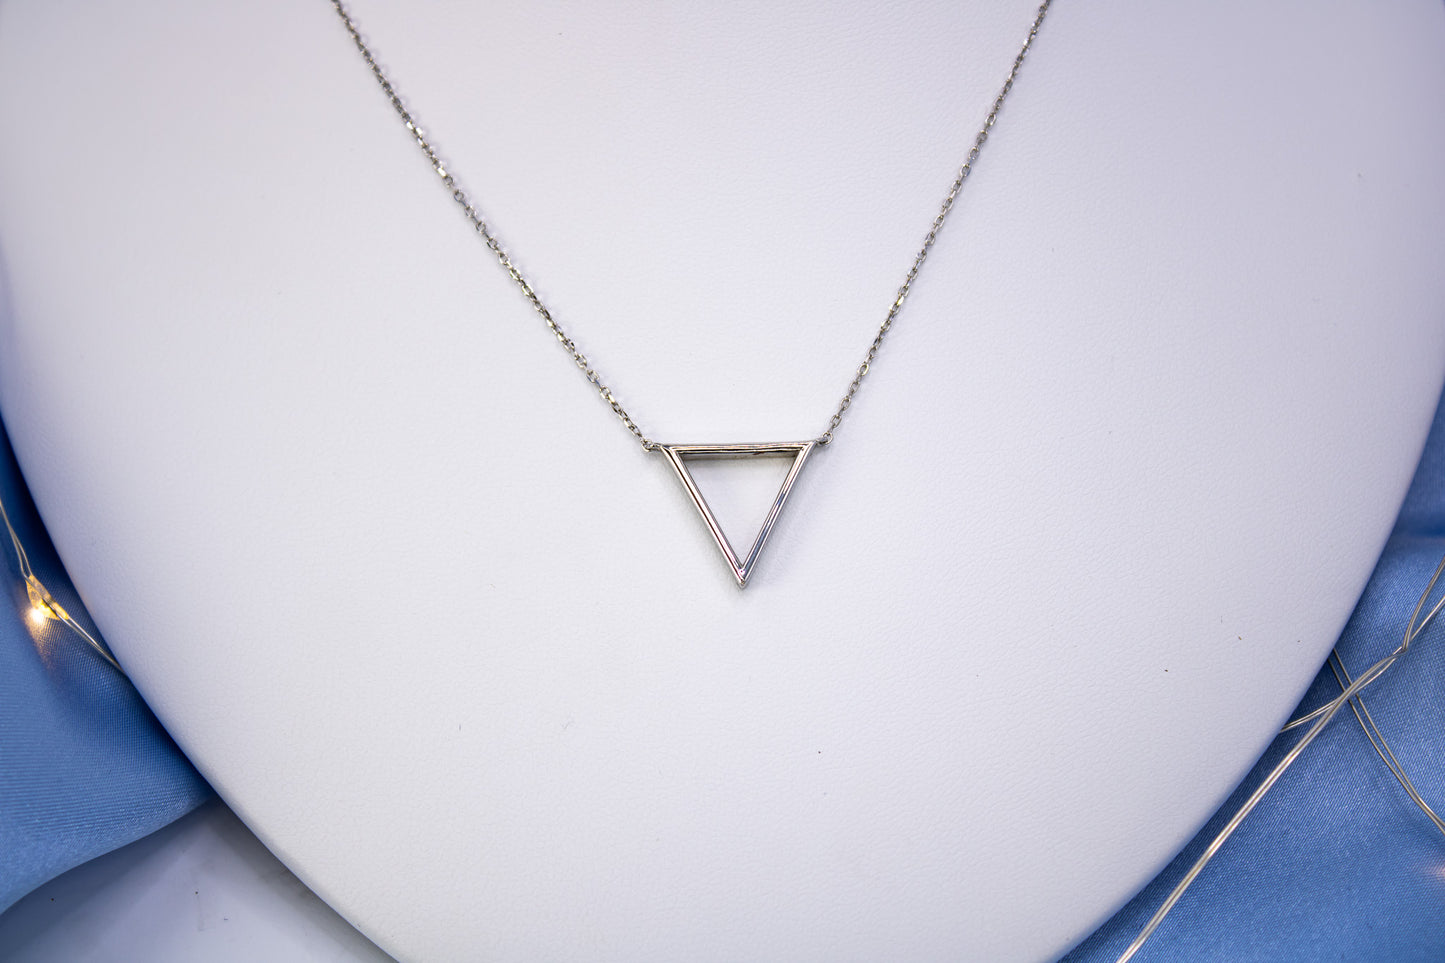 The Triune Necklace